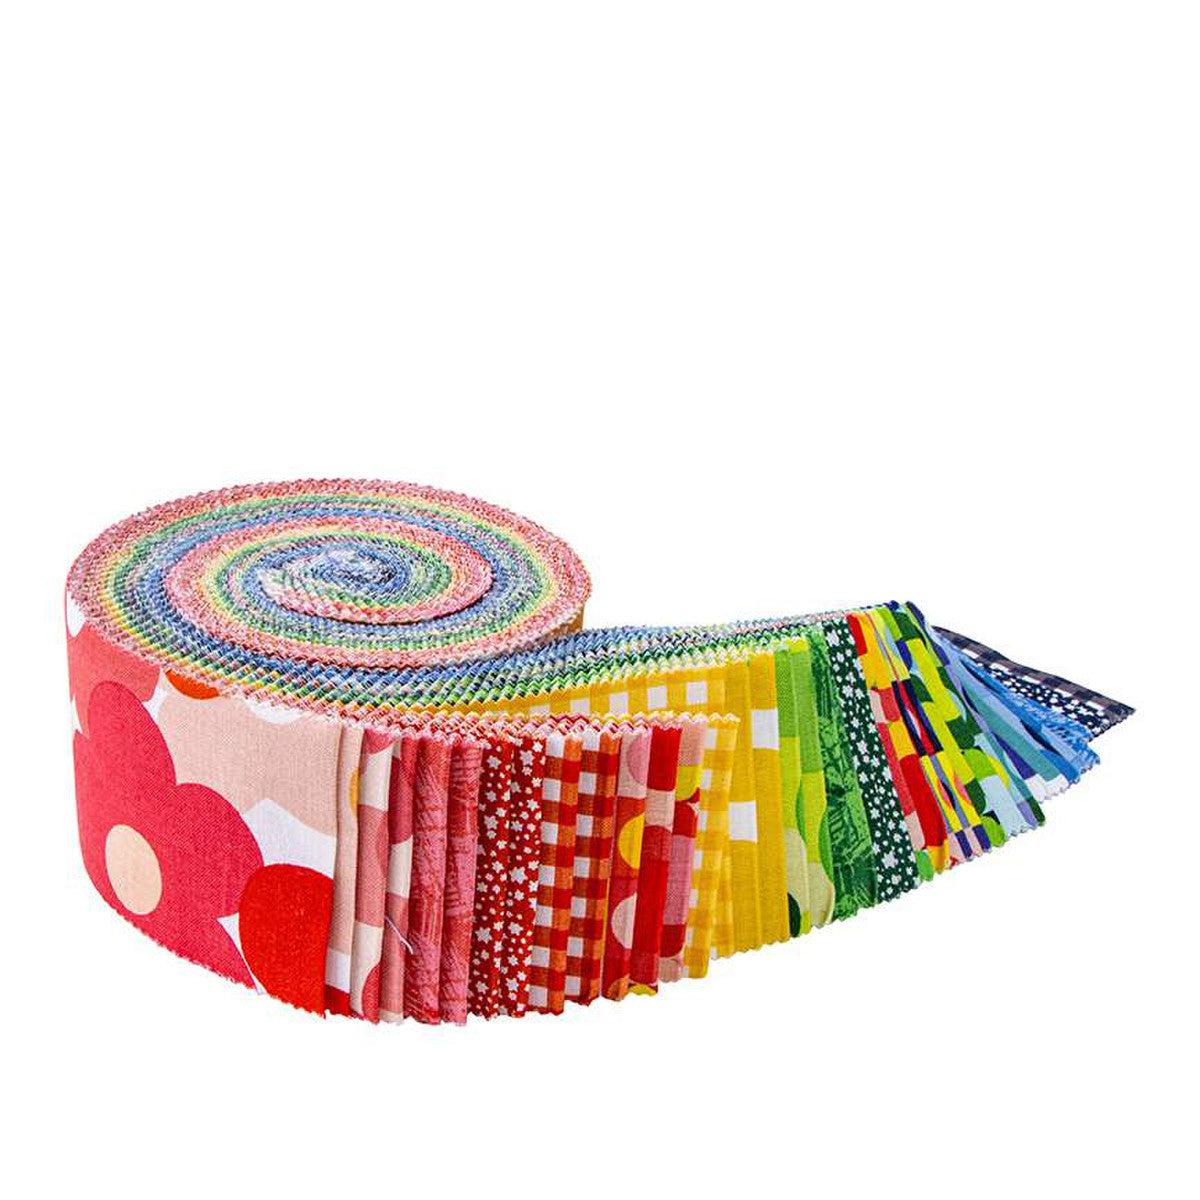 Copacetic 2 1/2" Jelly Roll-Riley Blake Fabrics-My Favorite Quilt Store